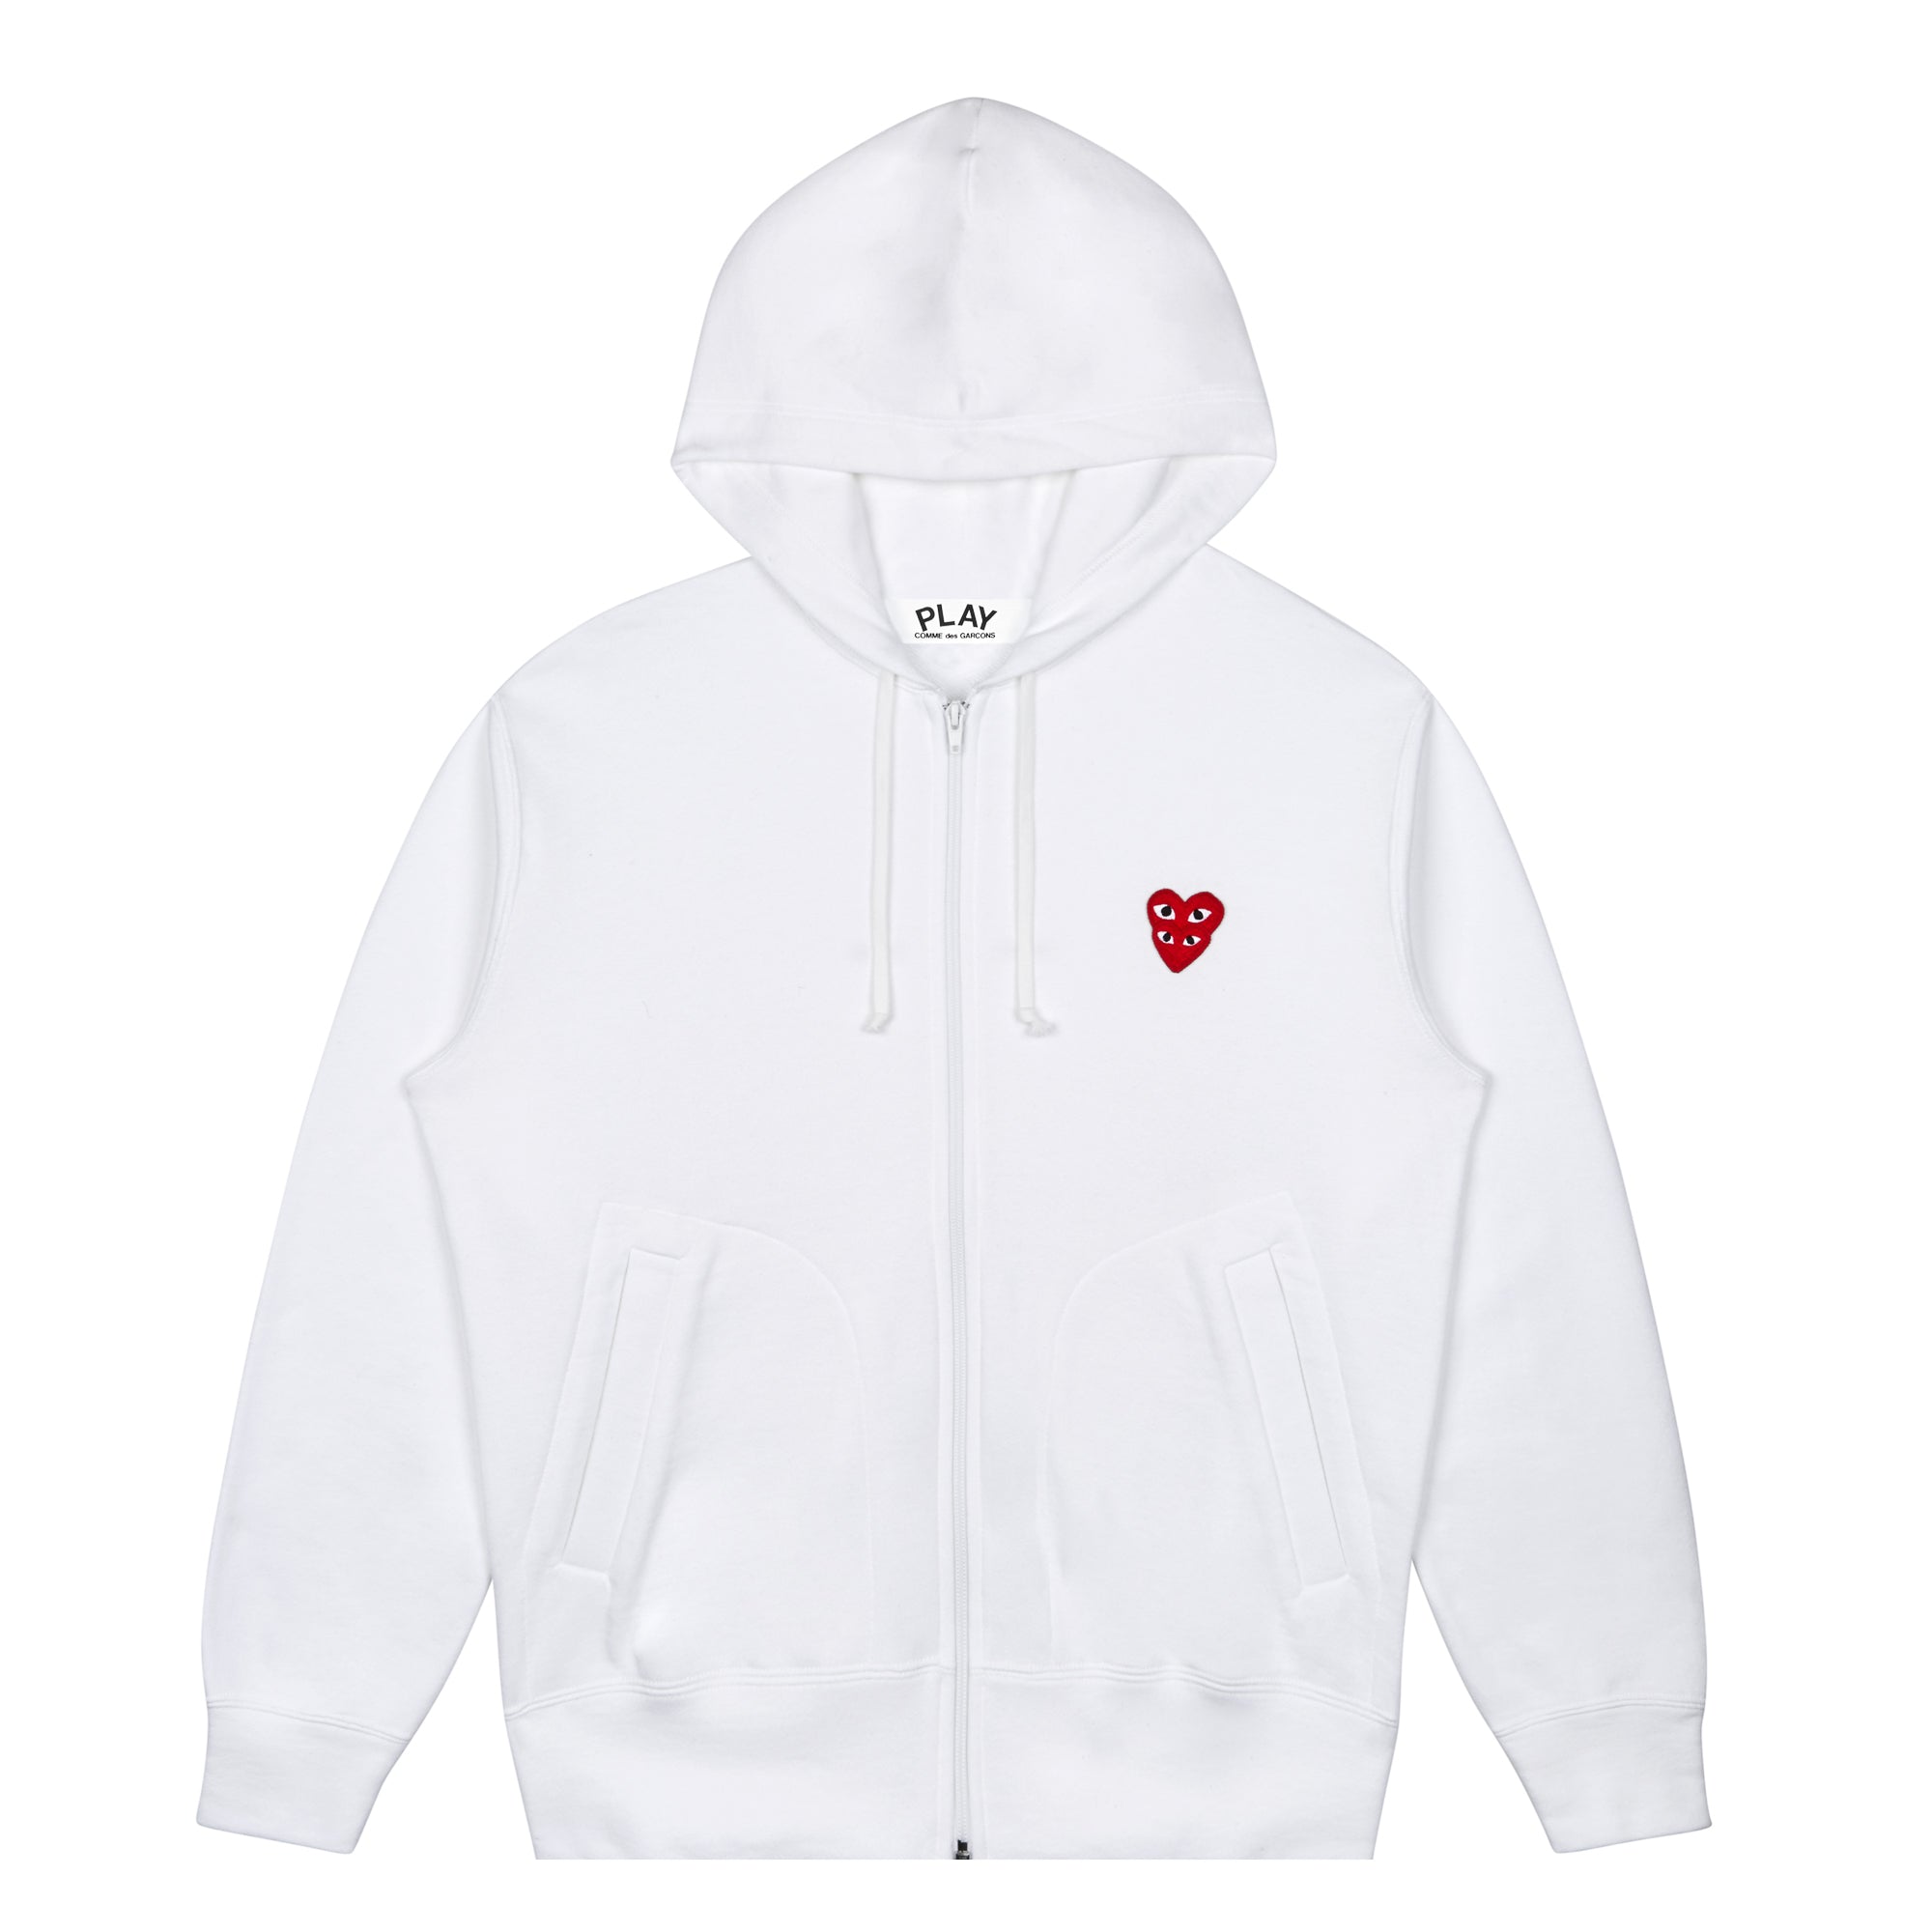 Play Comme des Garçons - Hooded Sweatshirt with Double Red Heart - (White)